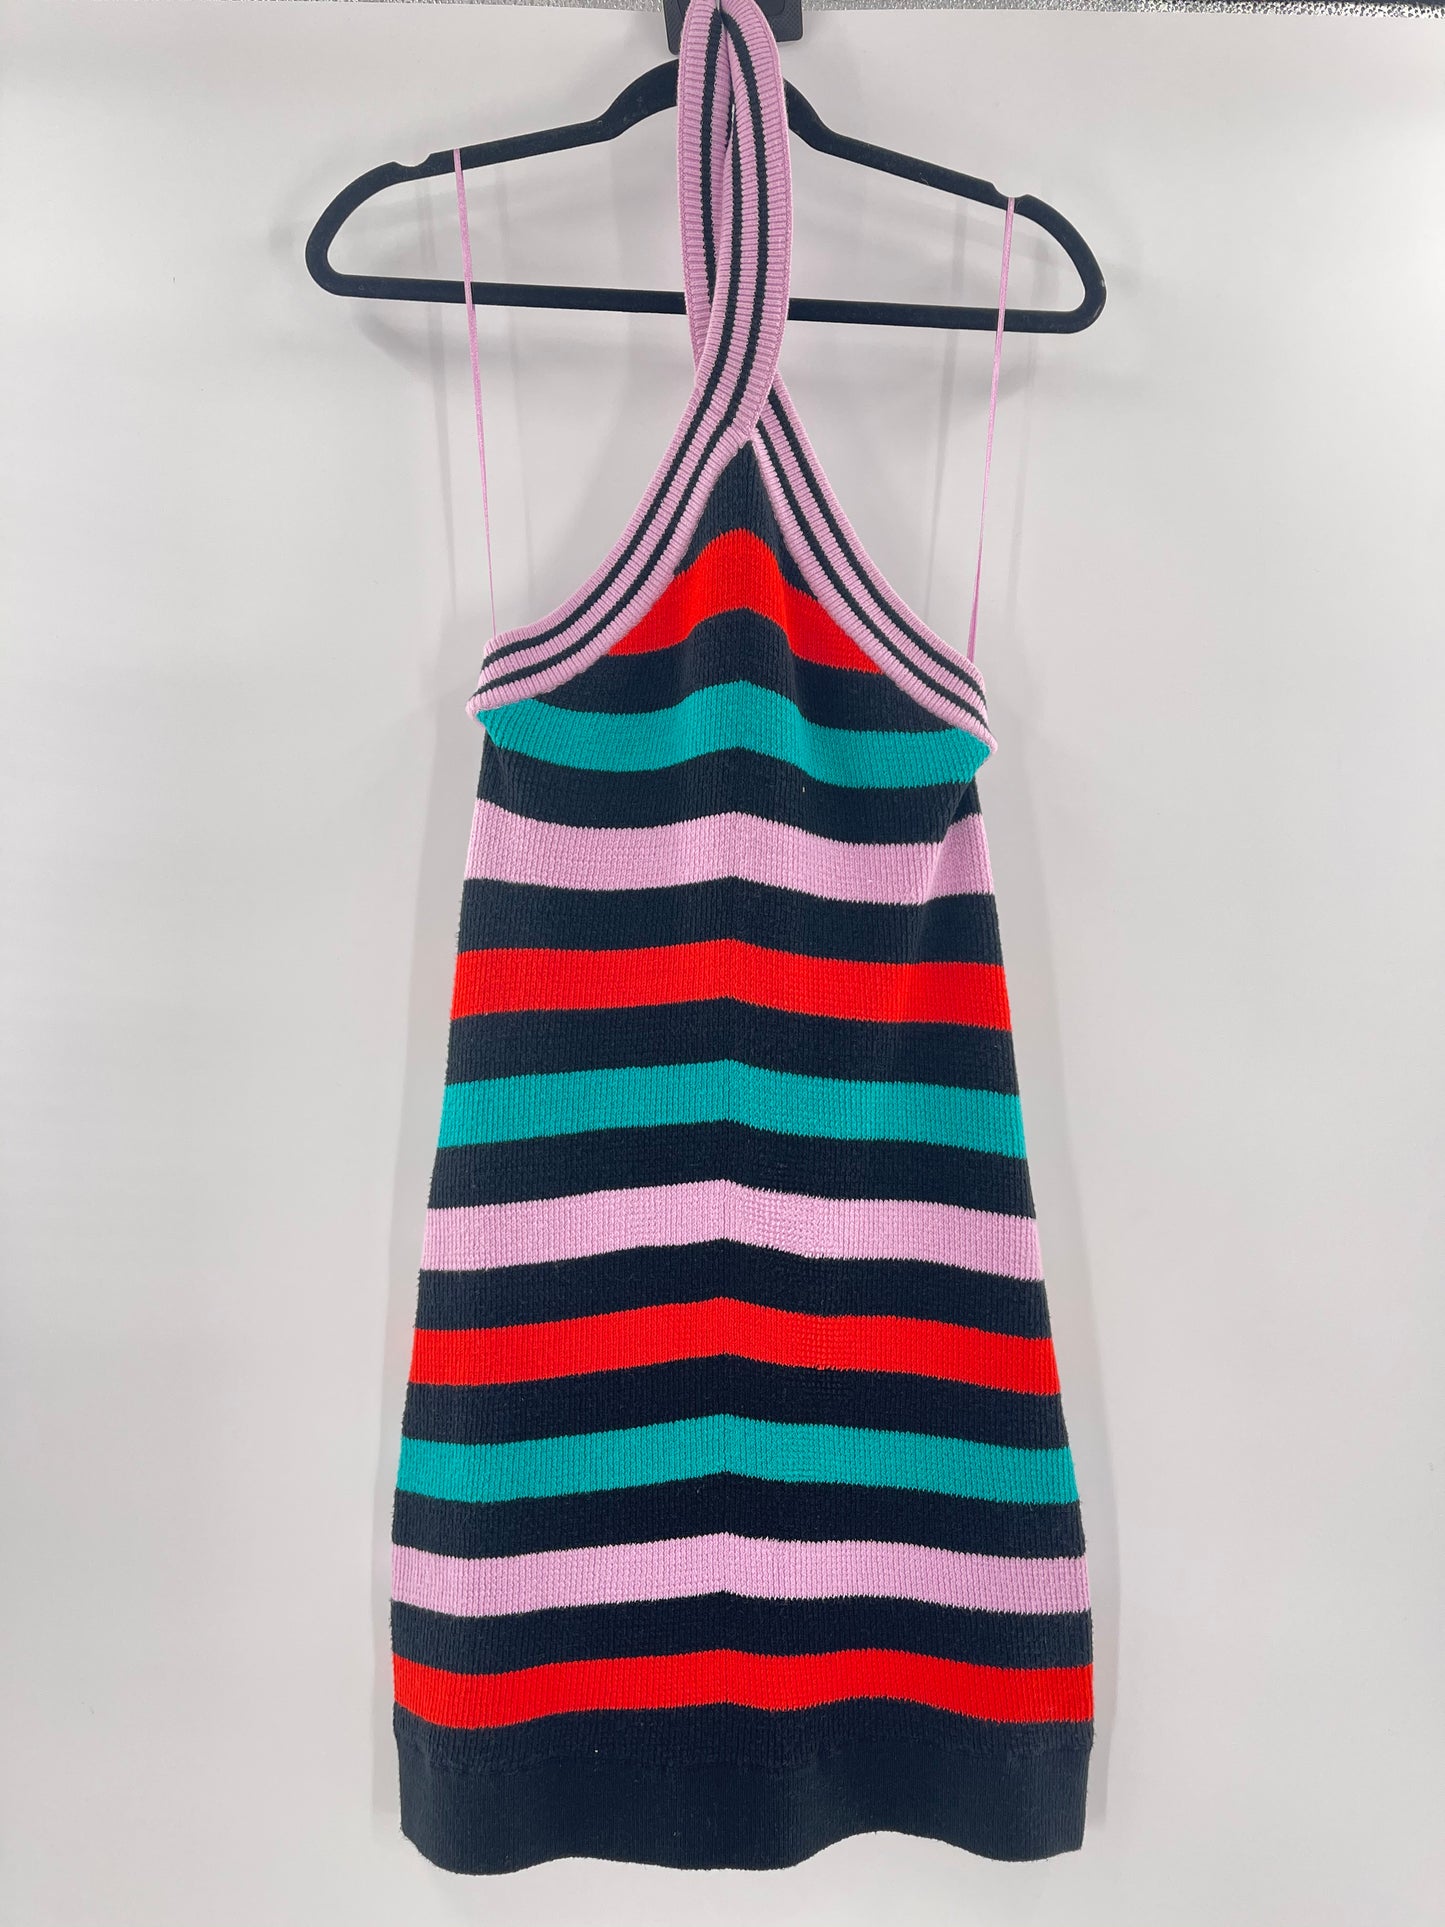 Urban Outfitters Halter Striped Knit Mini Dress (Size M)